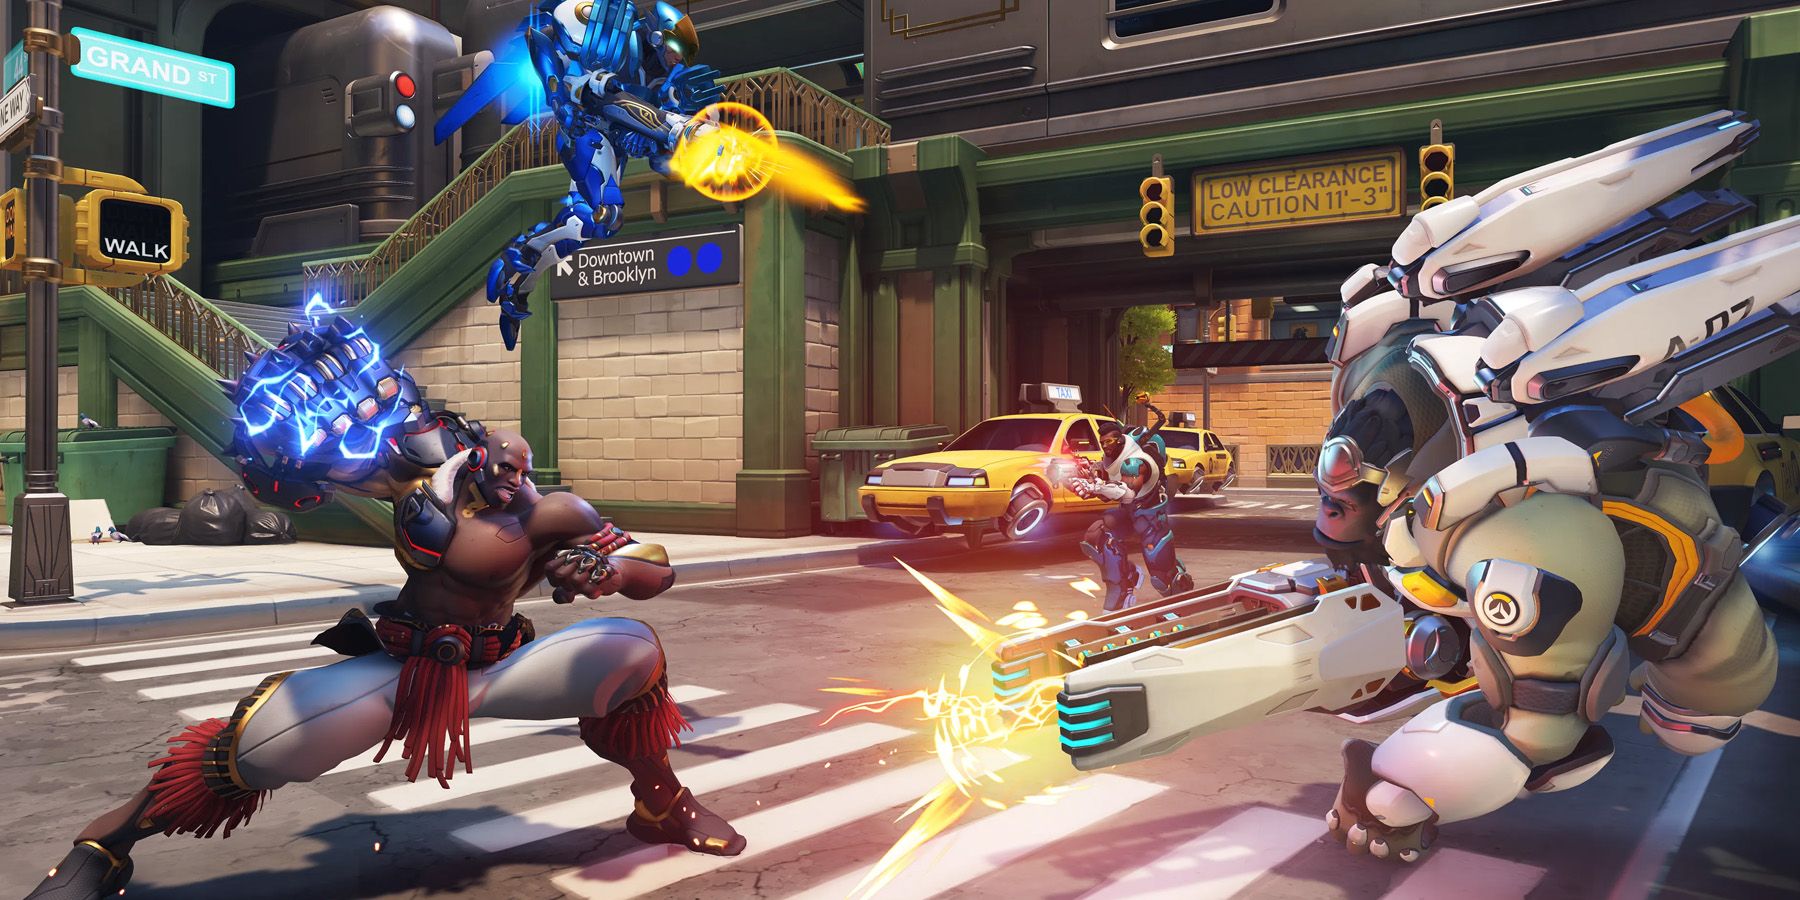 Prime Gaming Offers Overwatch/Heartstone Content; 8 New Games for